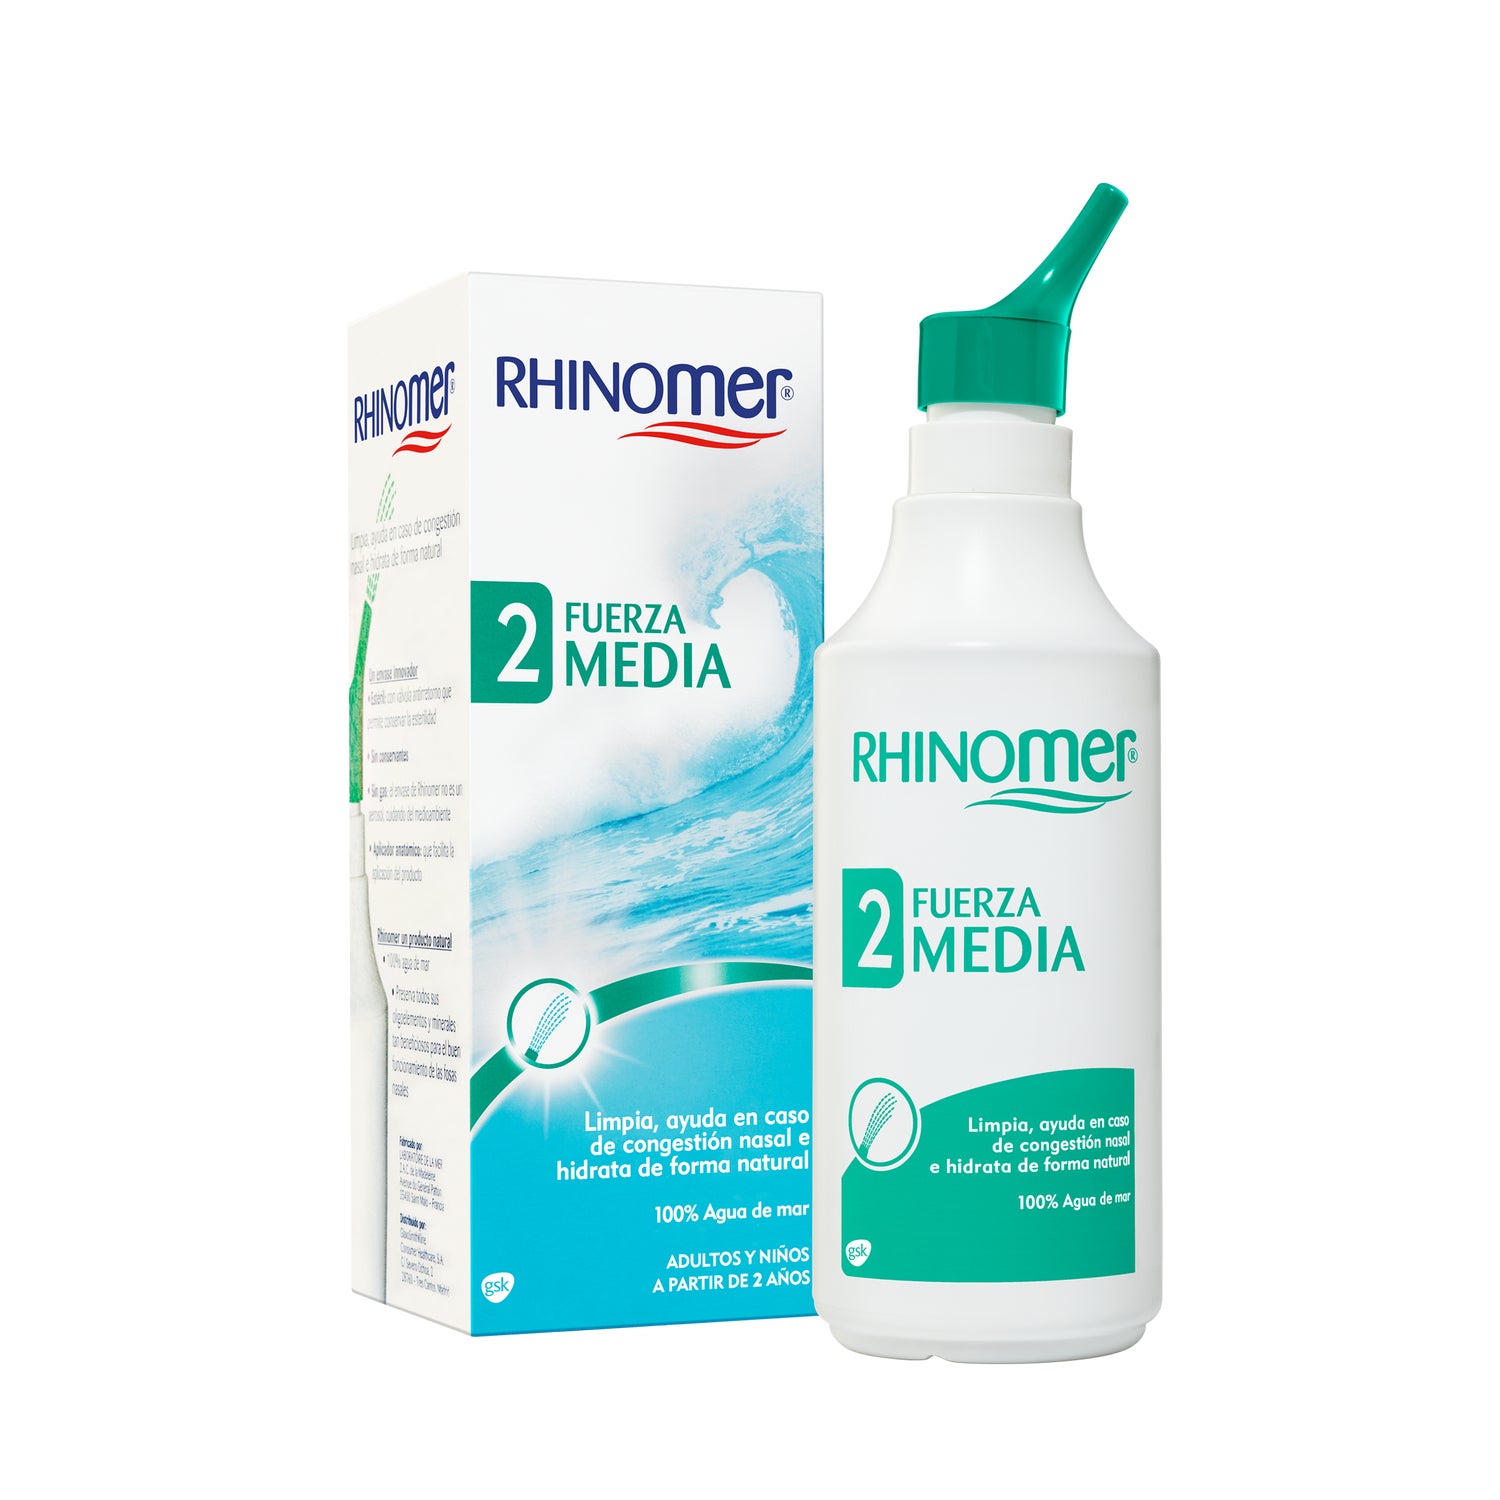 RHINOMER Nasal Cleansing Force 2 180ML on Offer